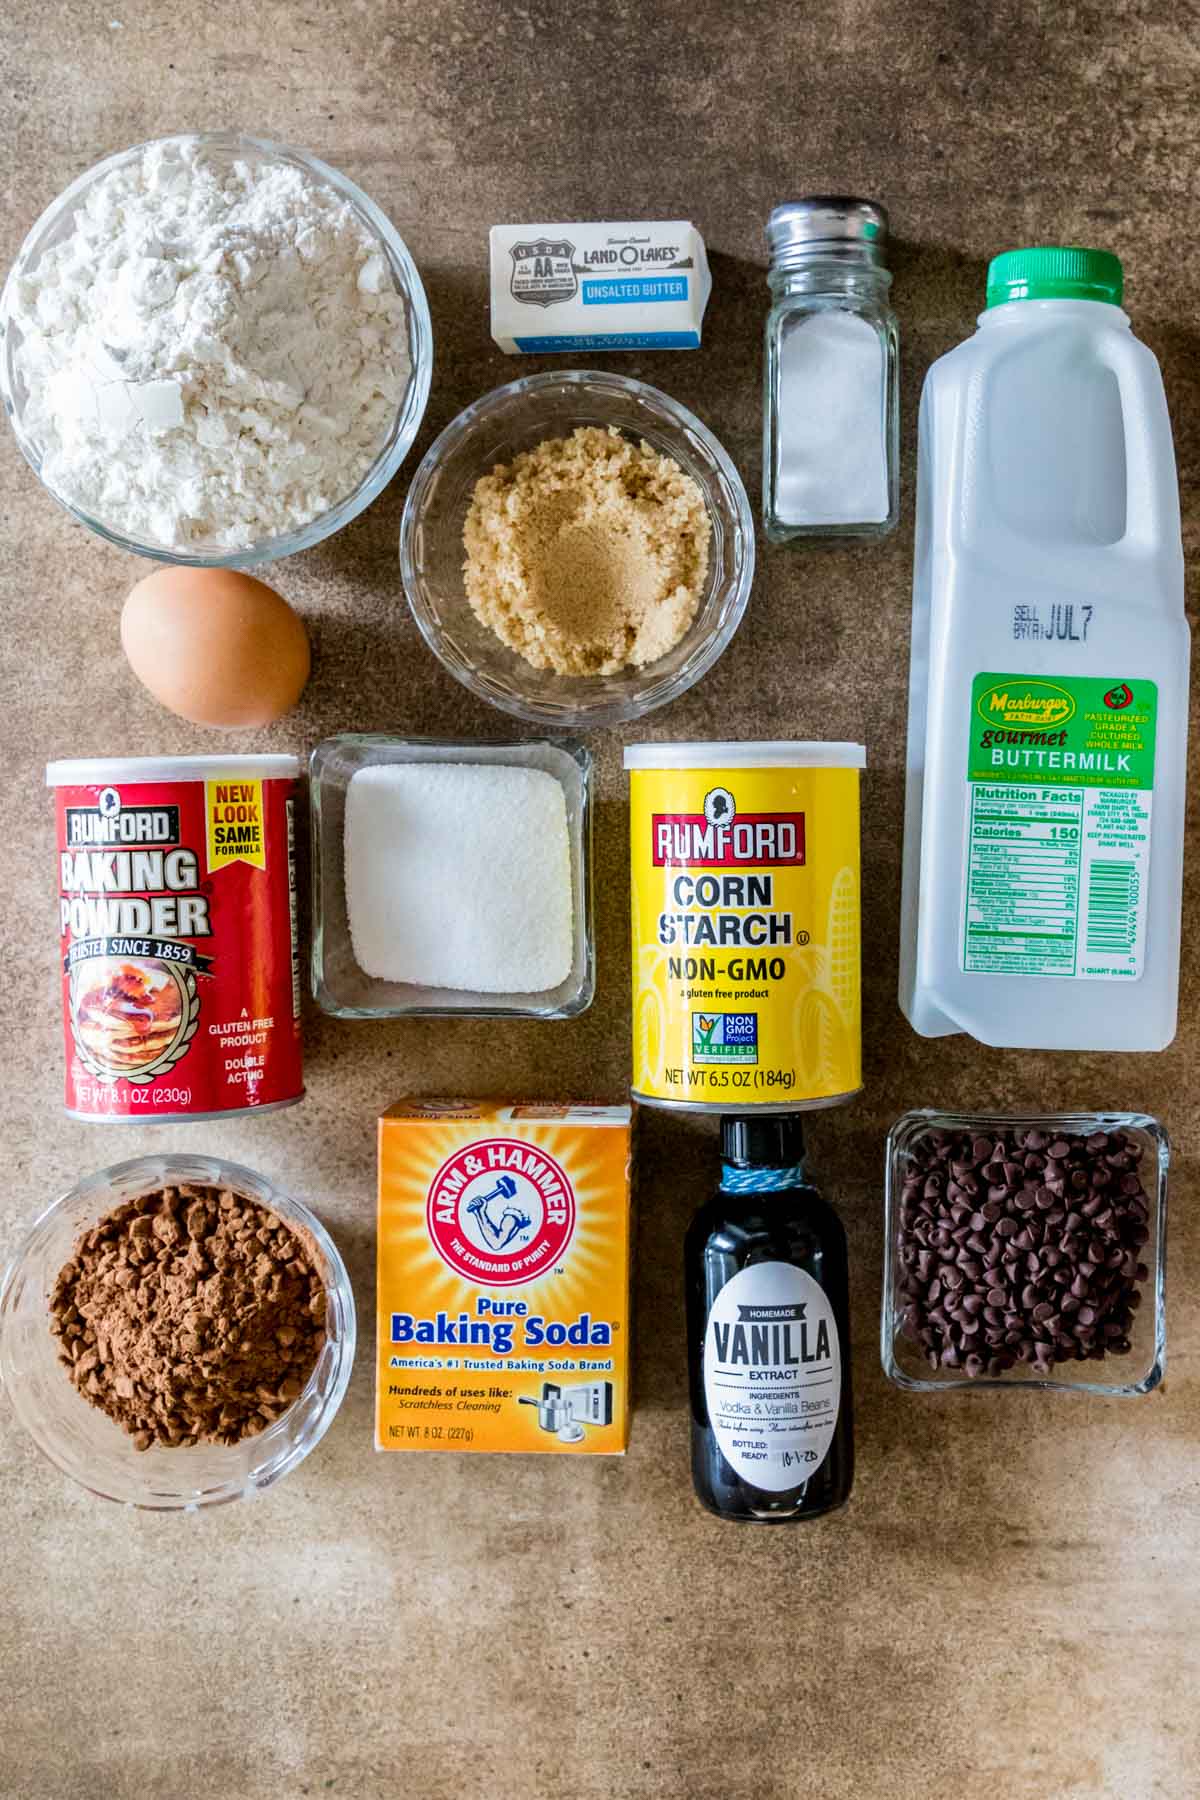 Overhead view of ingredients including buttermilk, cocoa powder, chocolate chips, cornstarch, and more.